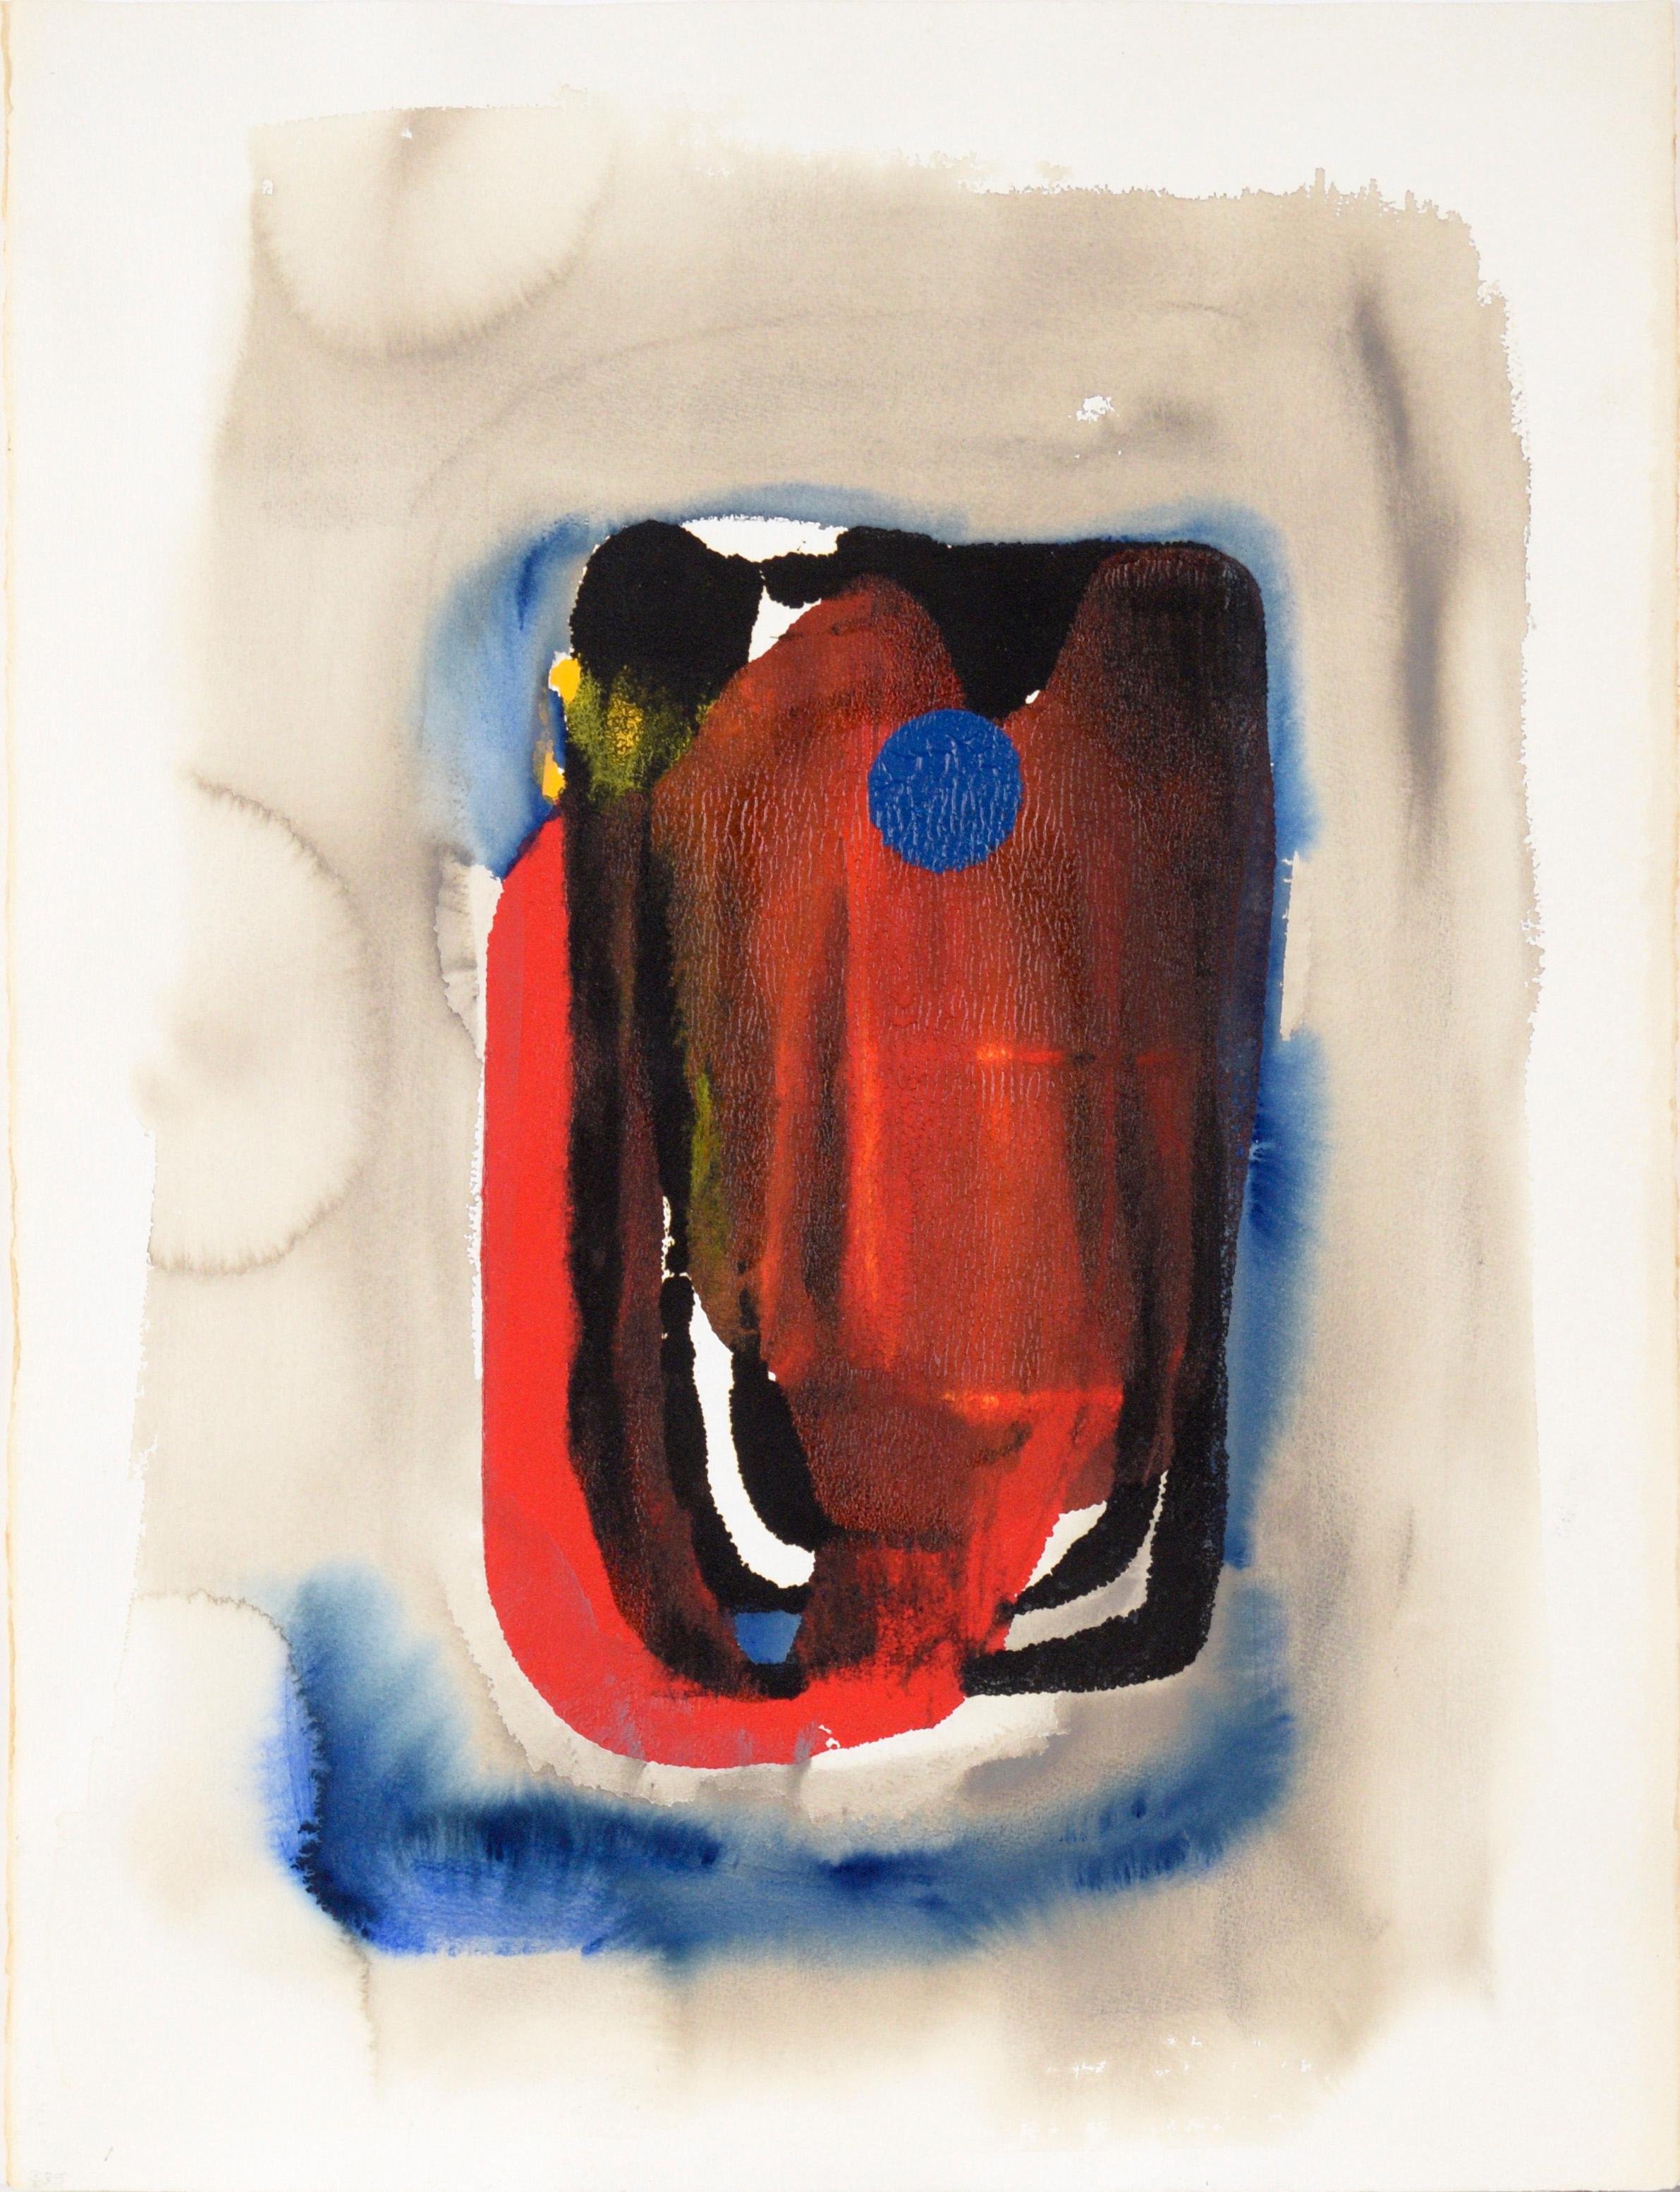 Ricardo de Silva Abstract Painting - Monument in Red, Black, and Blue - Abstract Expressionist in Acrylic on Paper